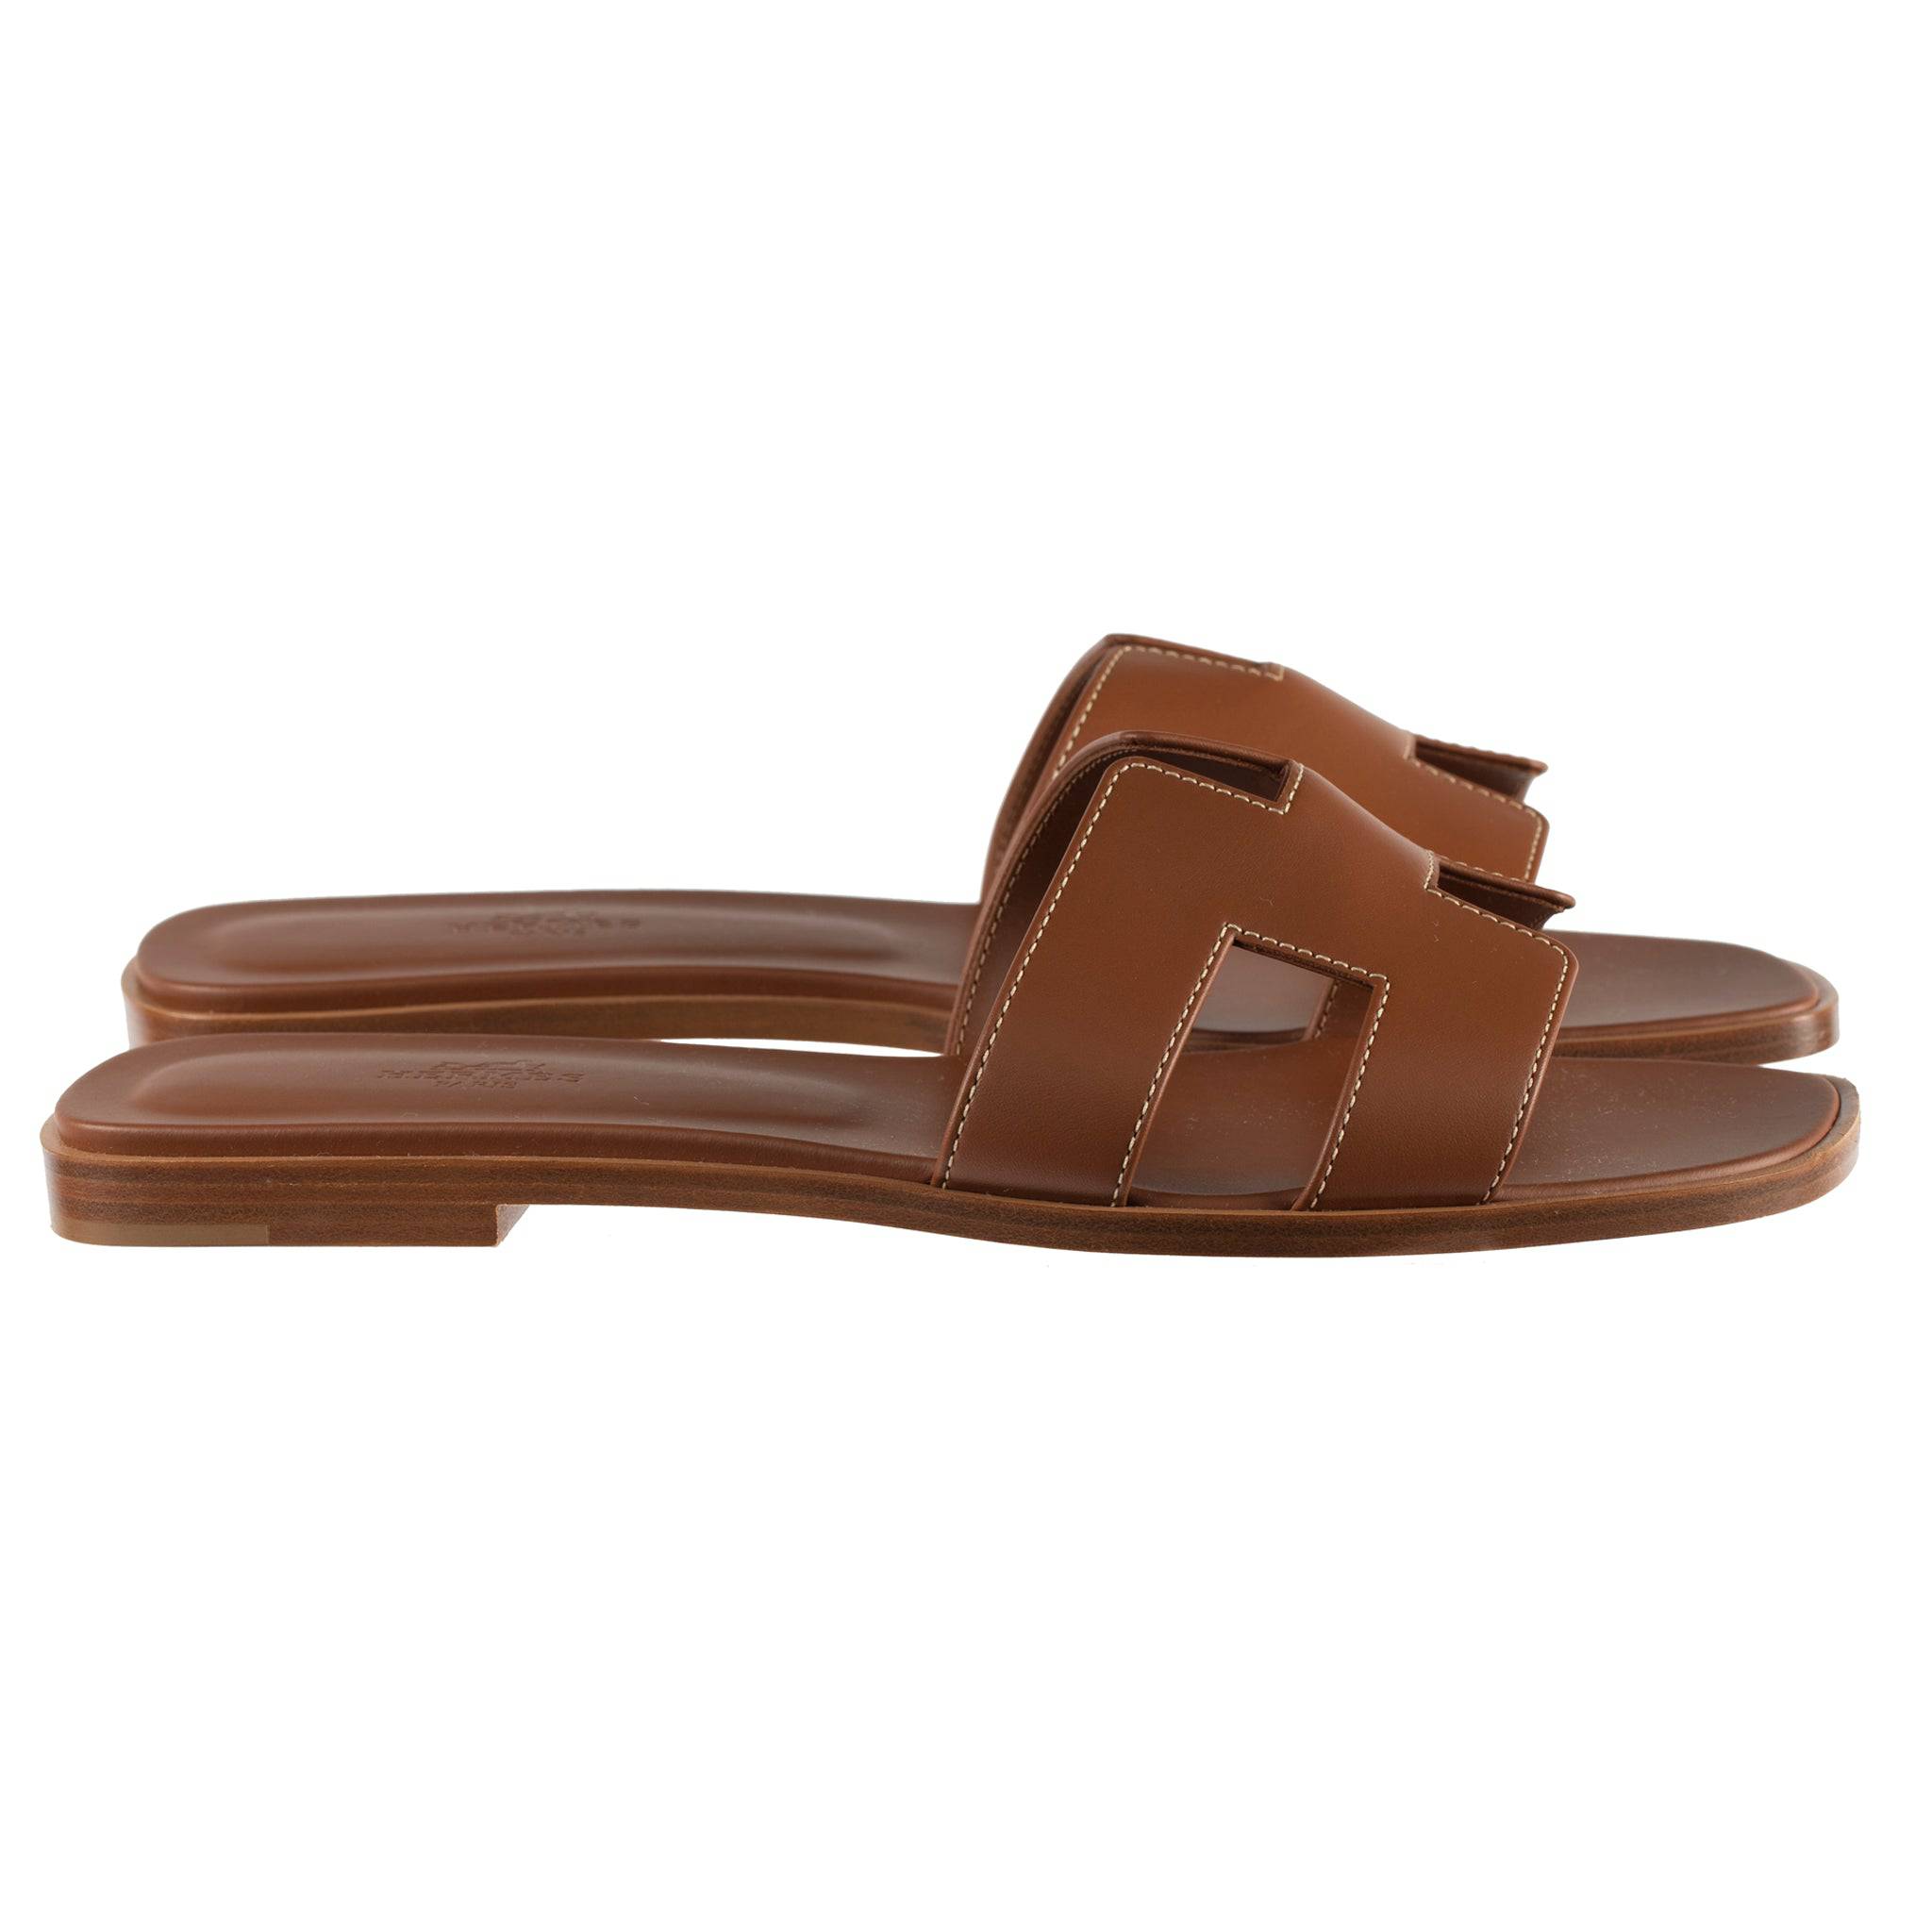 HERMES ORAN SANDAL GOLD SMOOTH LEATHER - On Repeat